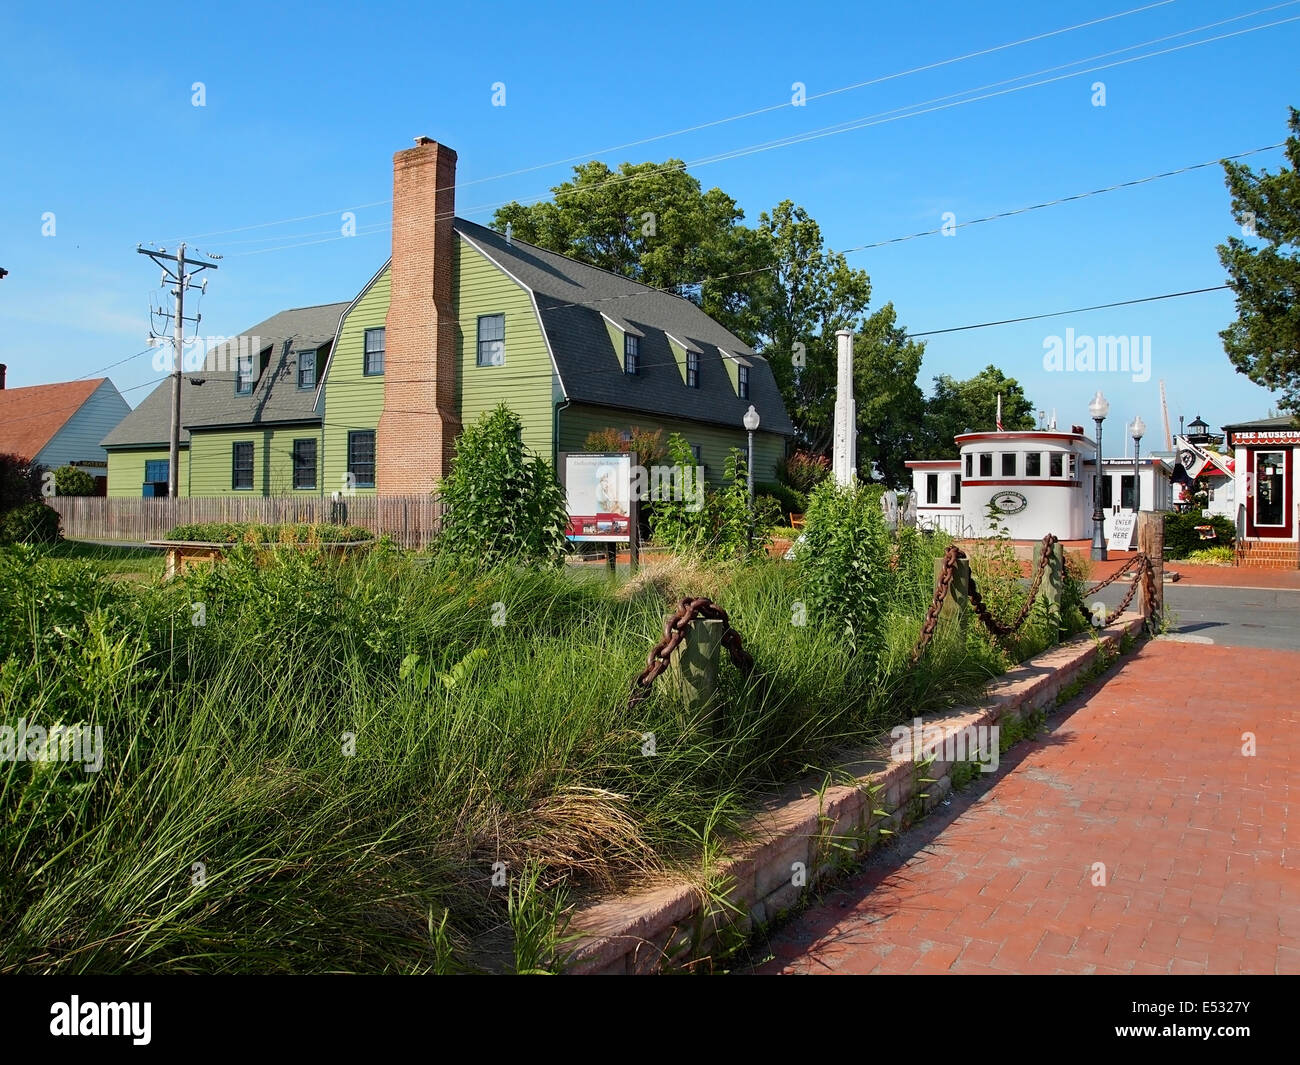 ST. MICHAELS - JULY 1: A street scene close to the water includes The Chesapeake Bay Maritime Museum, in Talbot County on July 1 Stock Photo